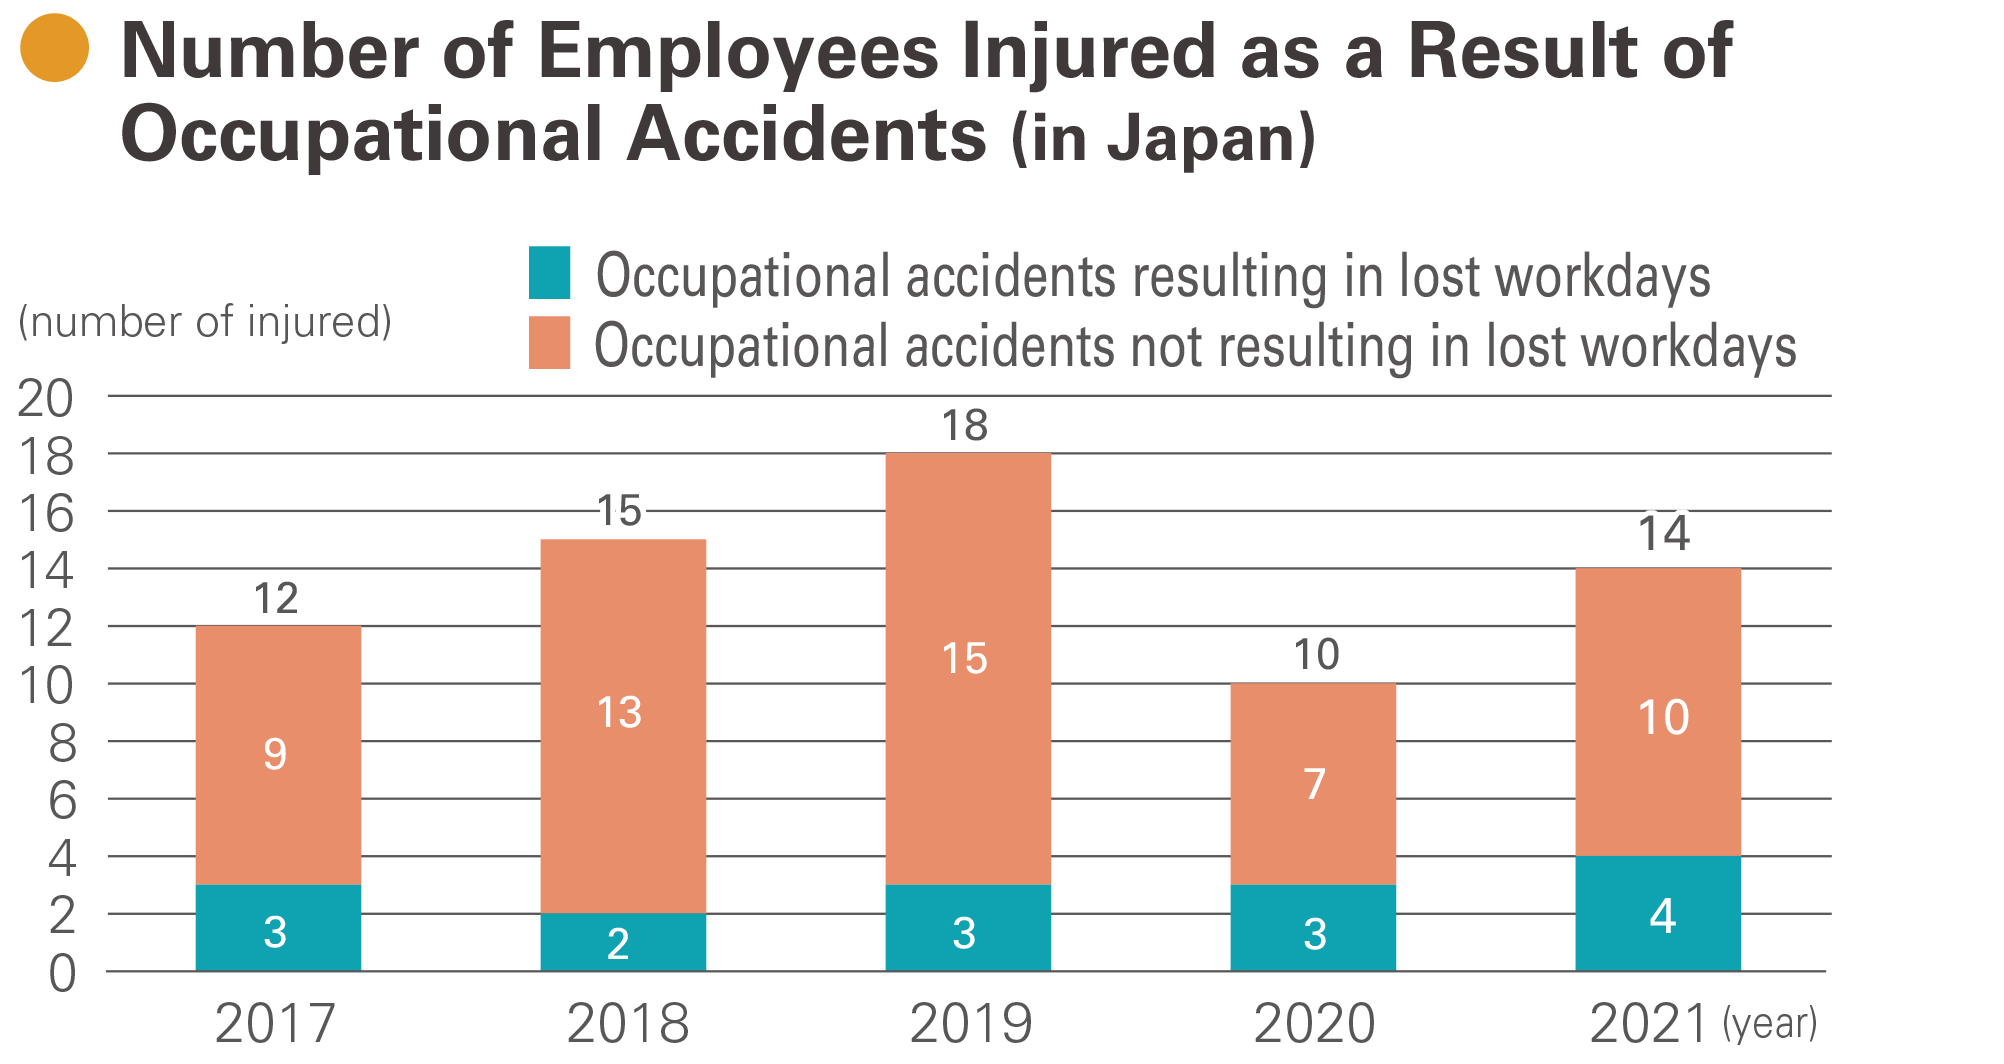 Number of Employees Injured as a Result of Occupational Accidents (in Japan)